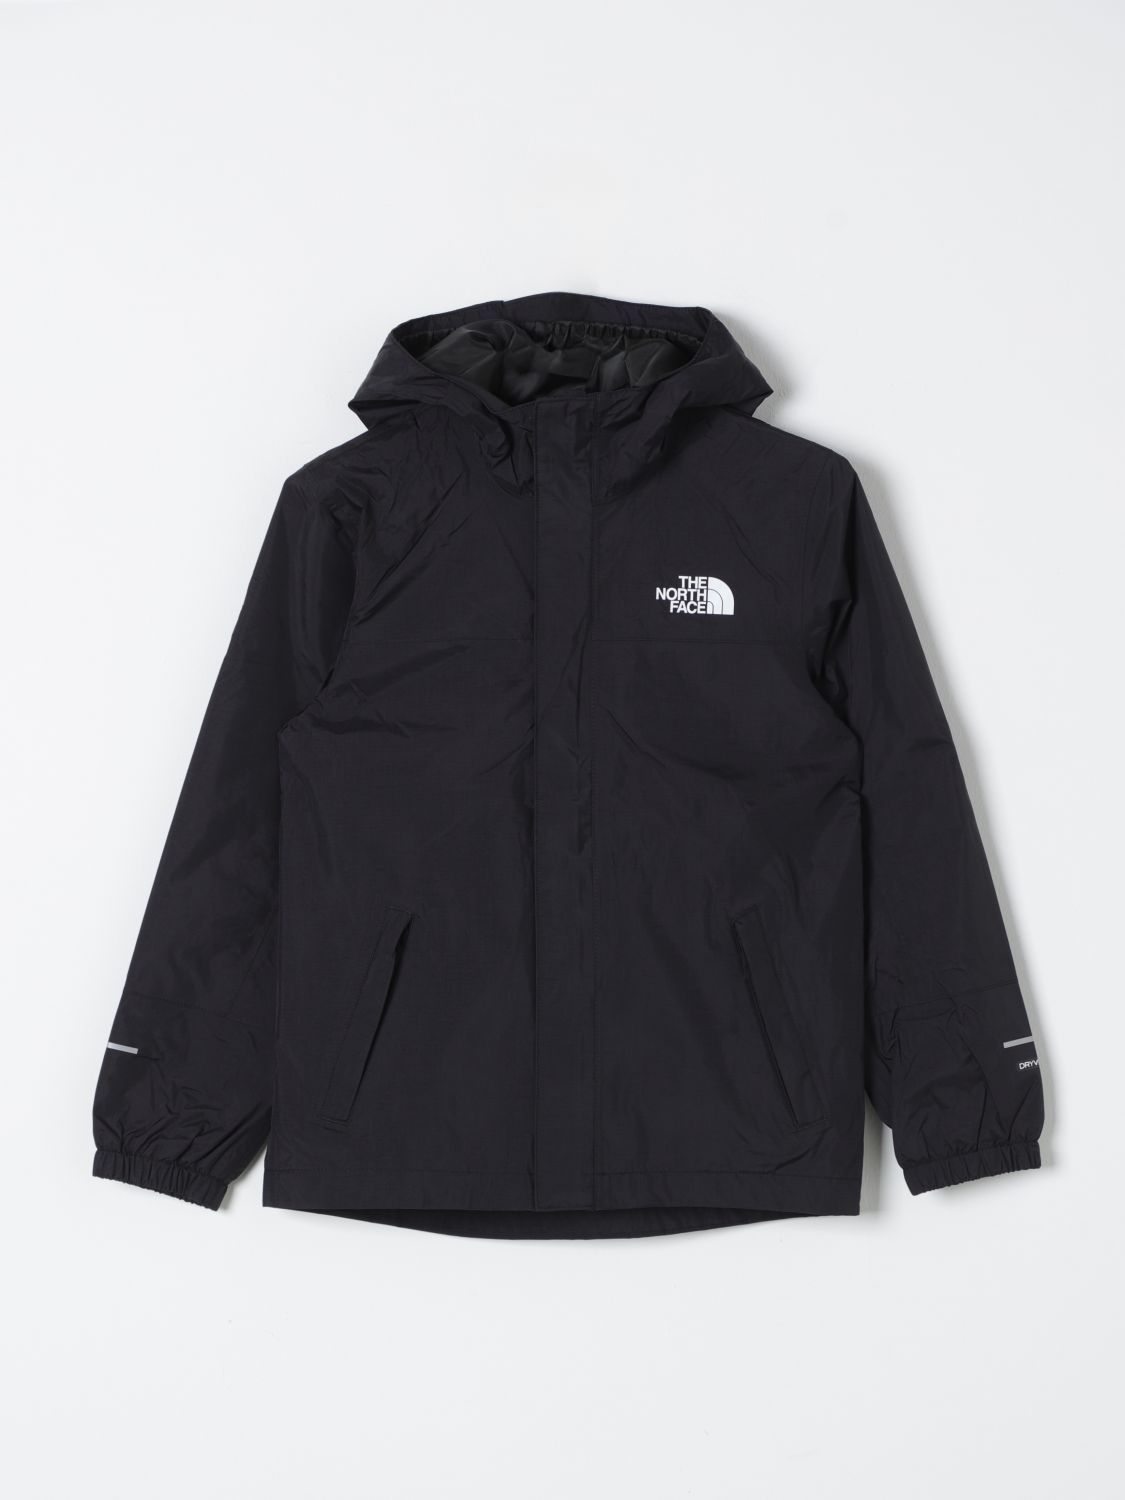 The North Face Jacket THE NORTH FACE Kids color Black